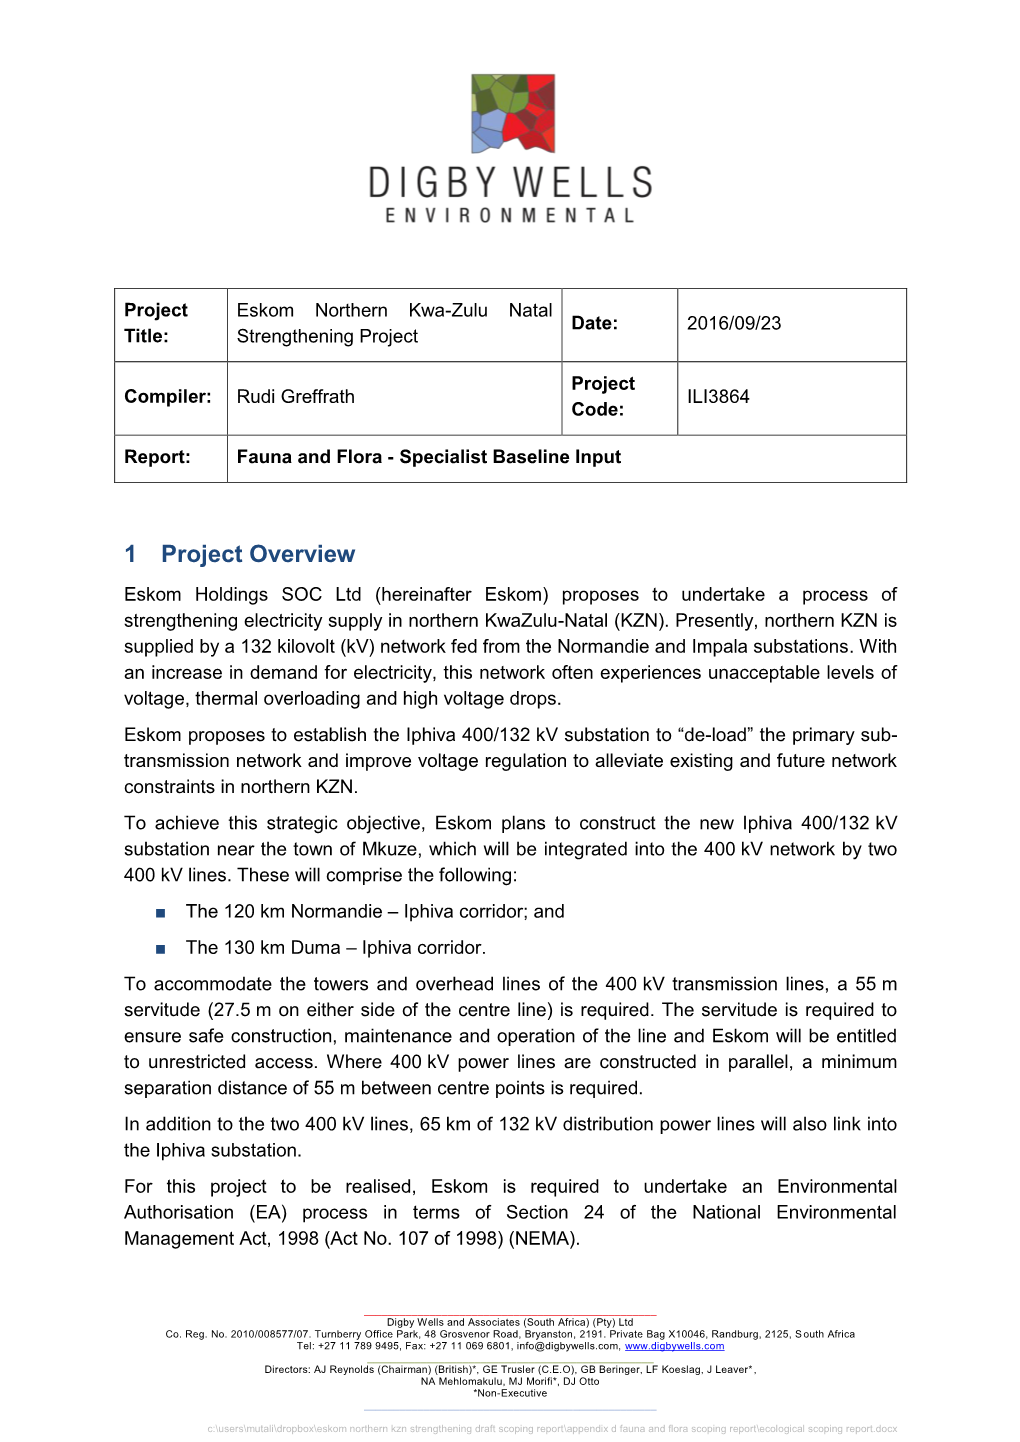 1 Project Overview Eskom Holdings SOC Ltd (Hereinafter Eskom) Proposes to Undertake a Process of Strengthening Electricity Supply in Northern Kwazulu-Natal (KZN)